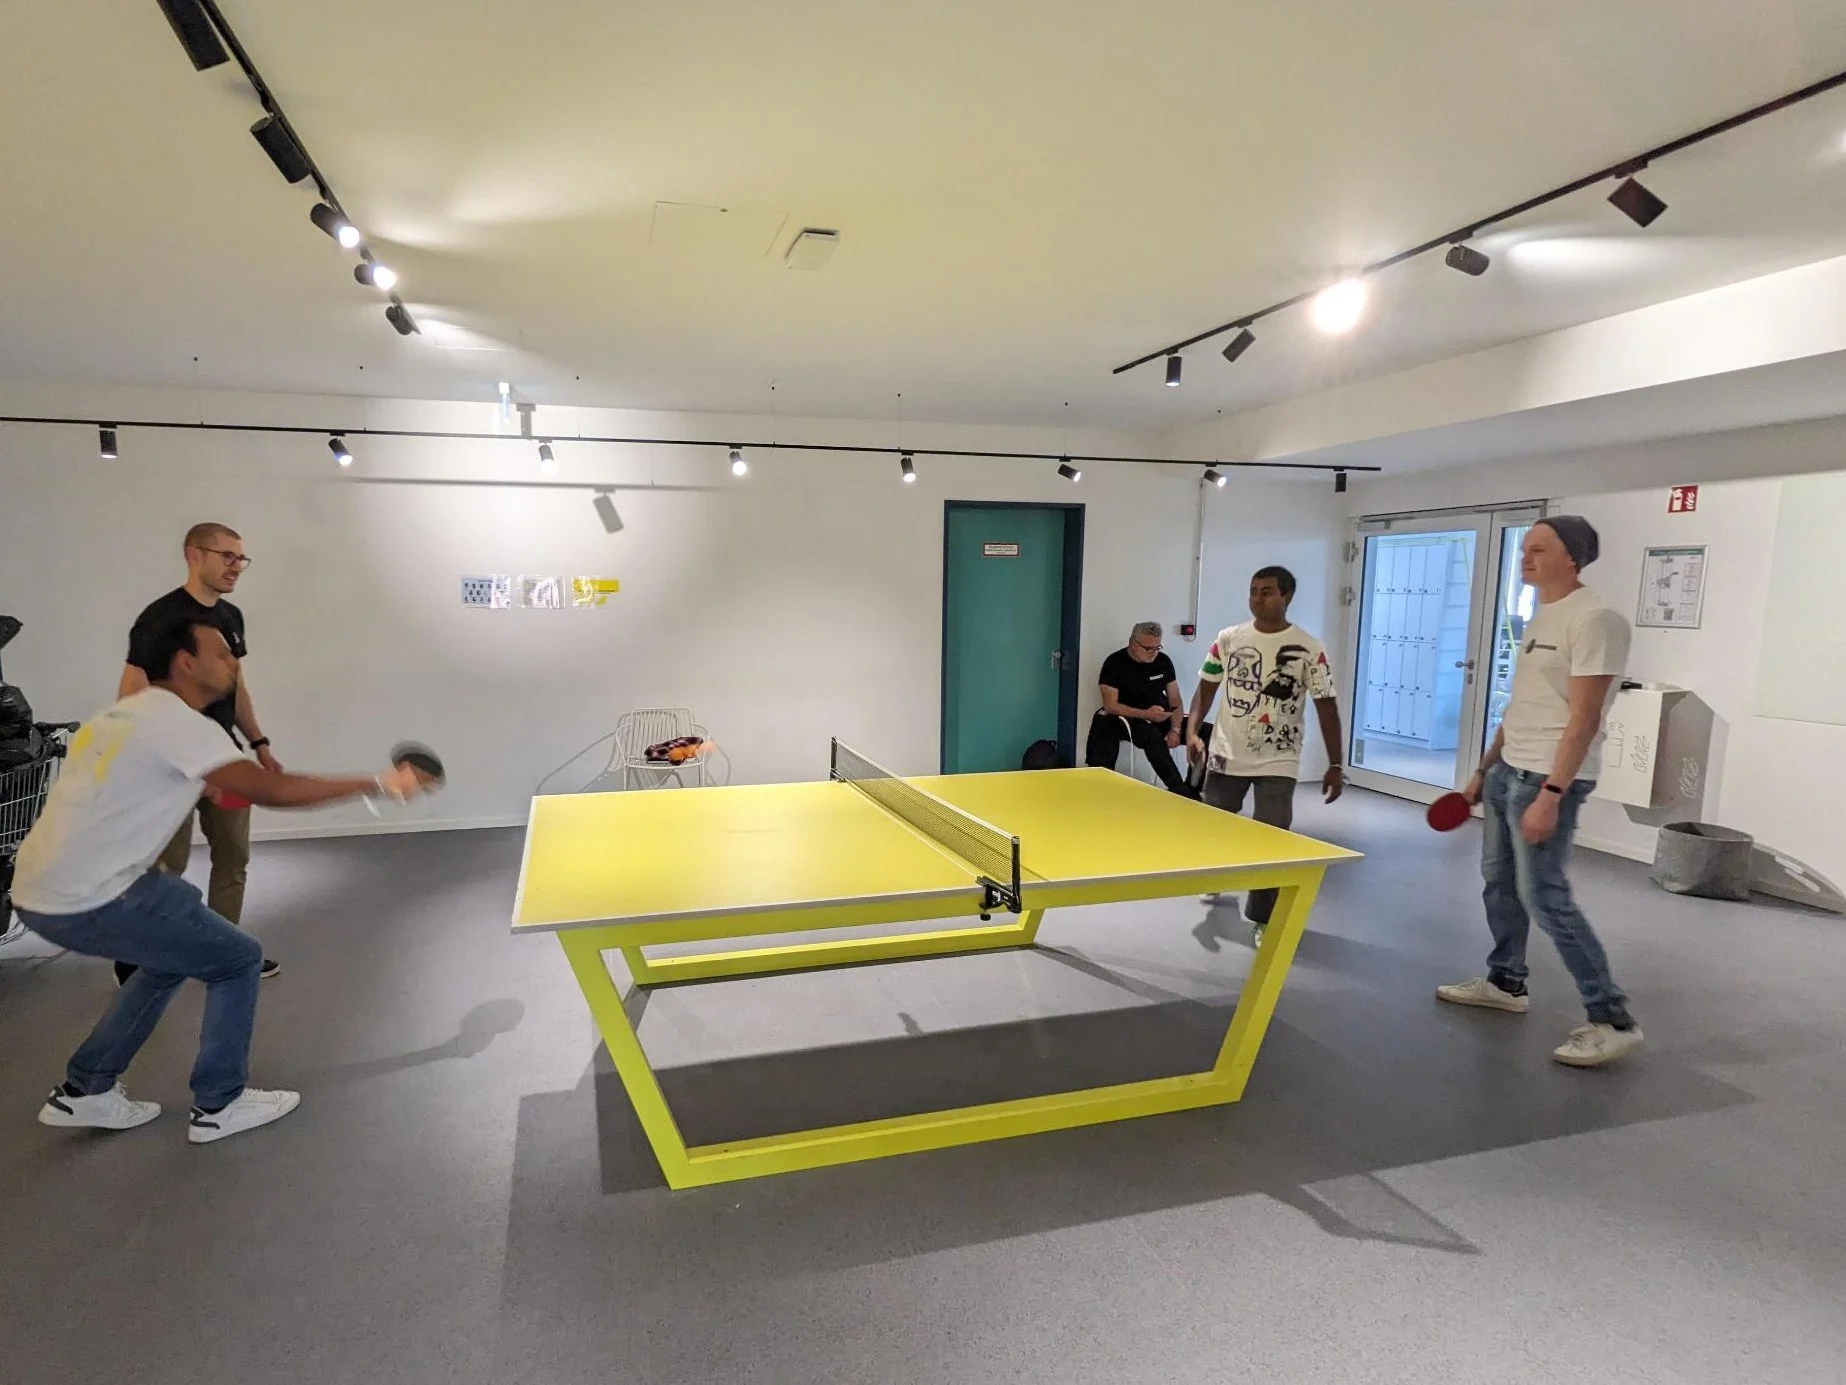 Personios playing table tennis in Munich